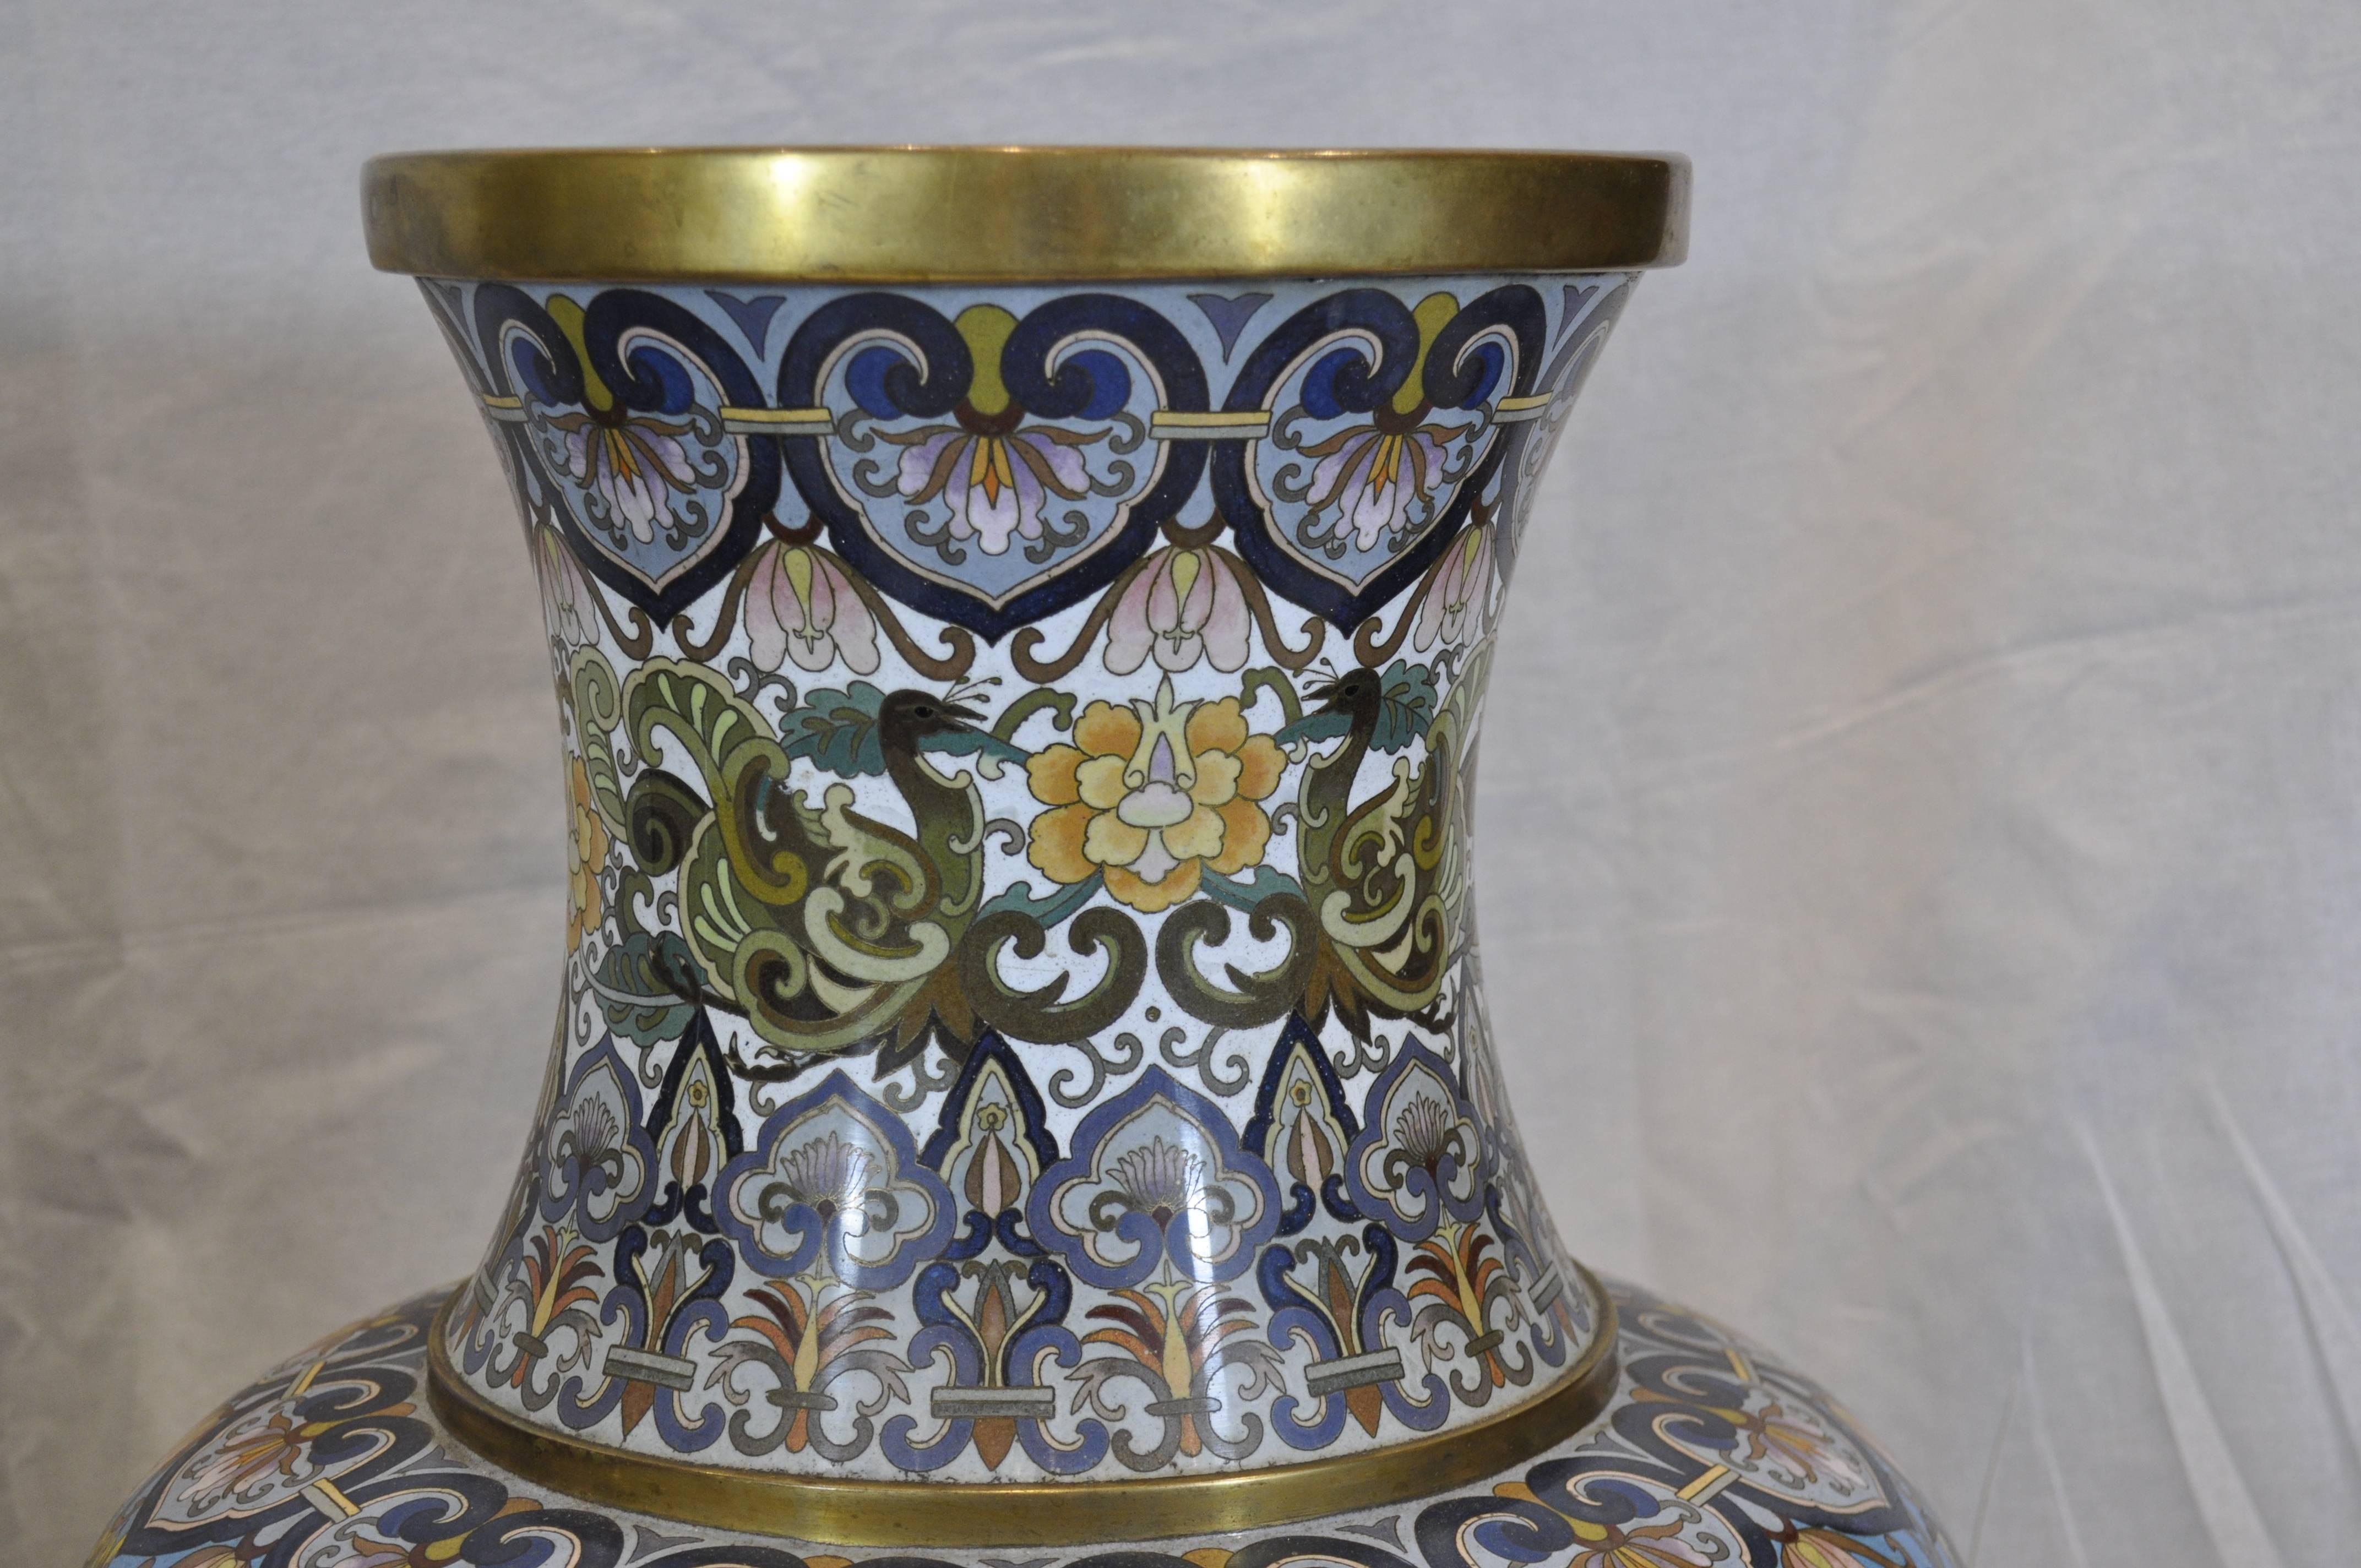 Cloissoné Pair of Early 20th Century Chinese Ormolu-Mounted Polychrome Cloisonné Vases For Sale